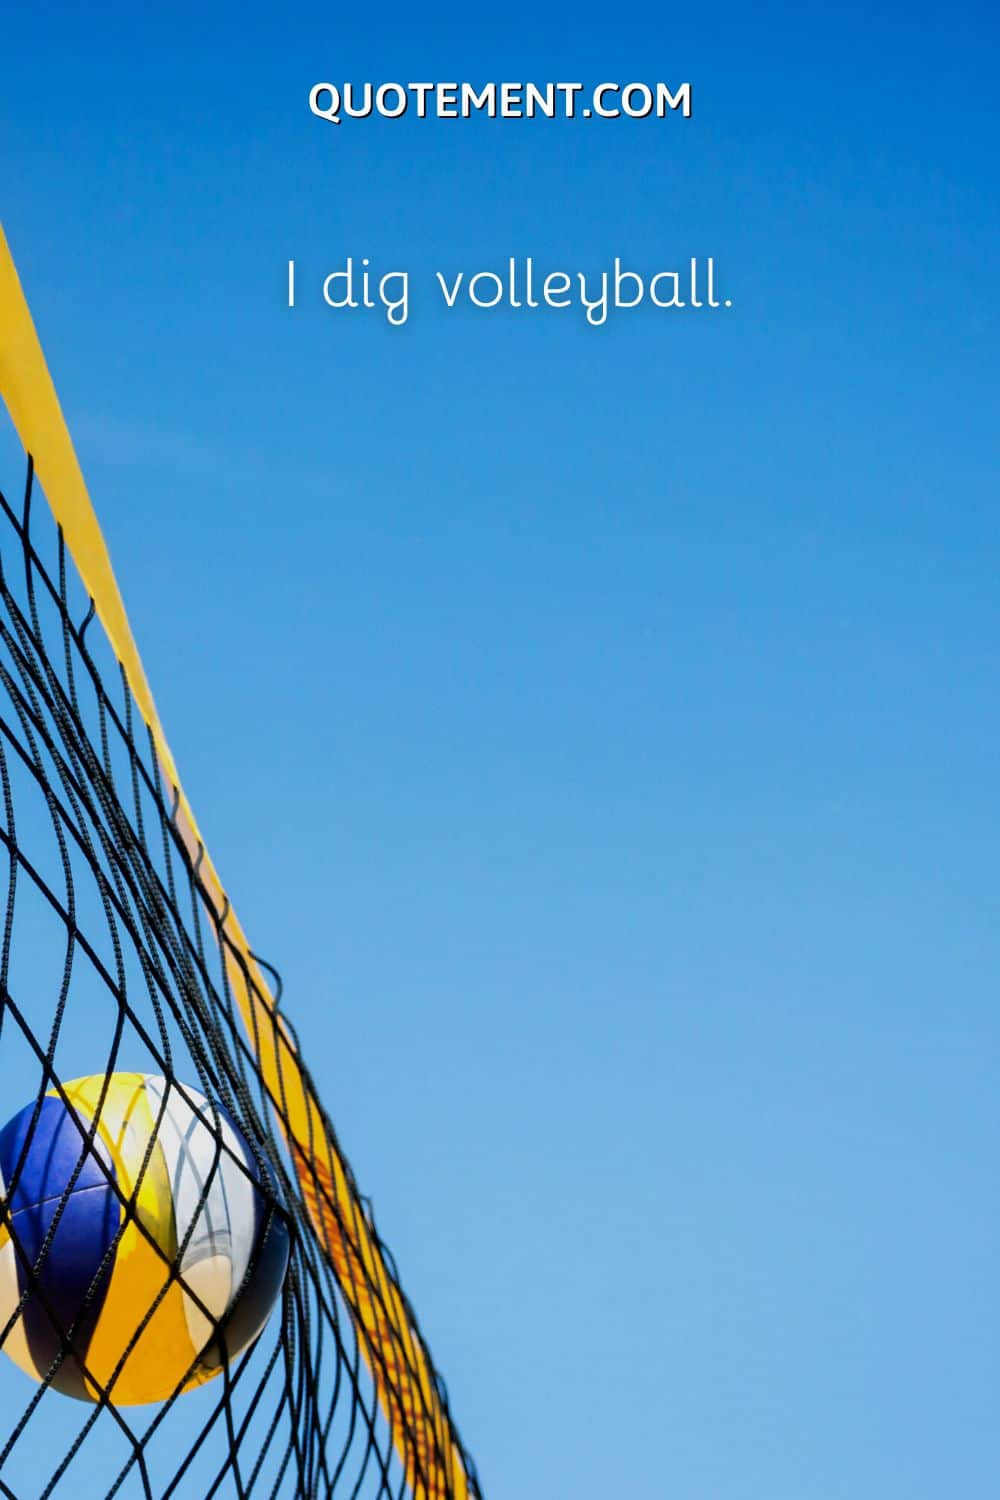 I dig volleyball.